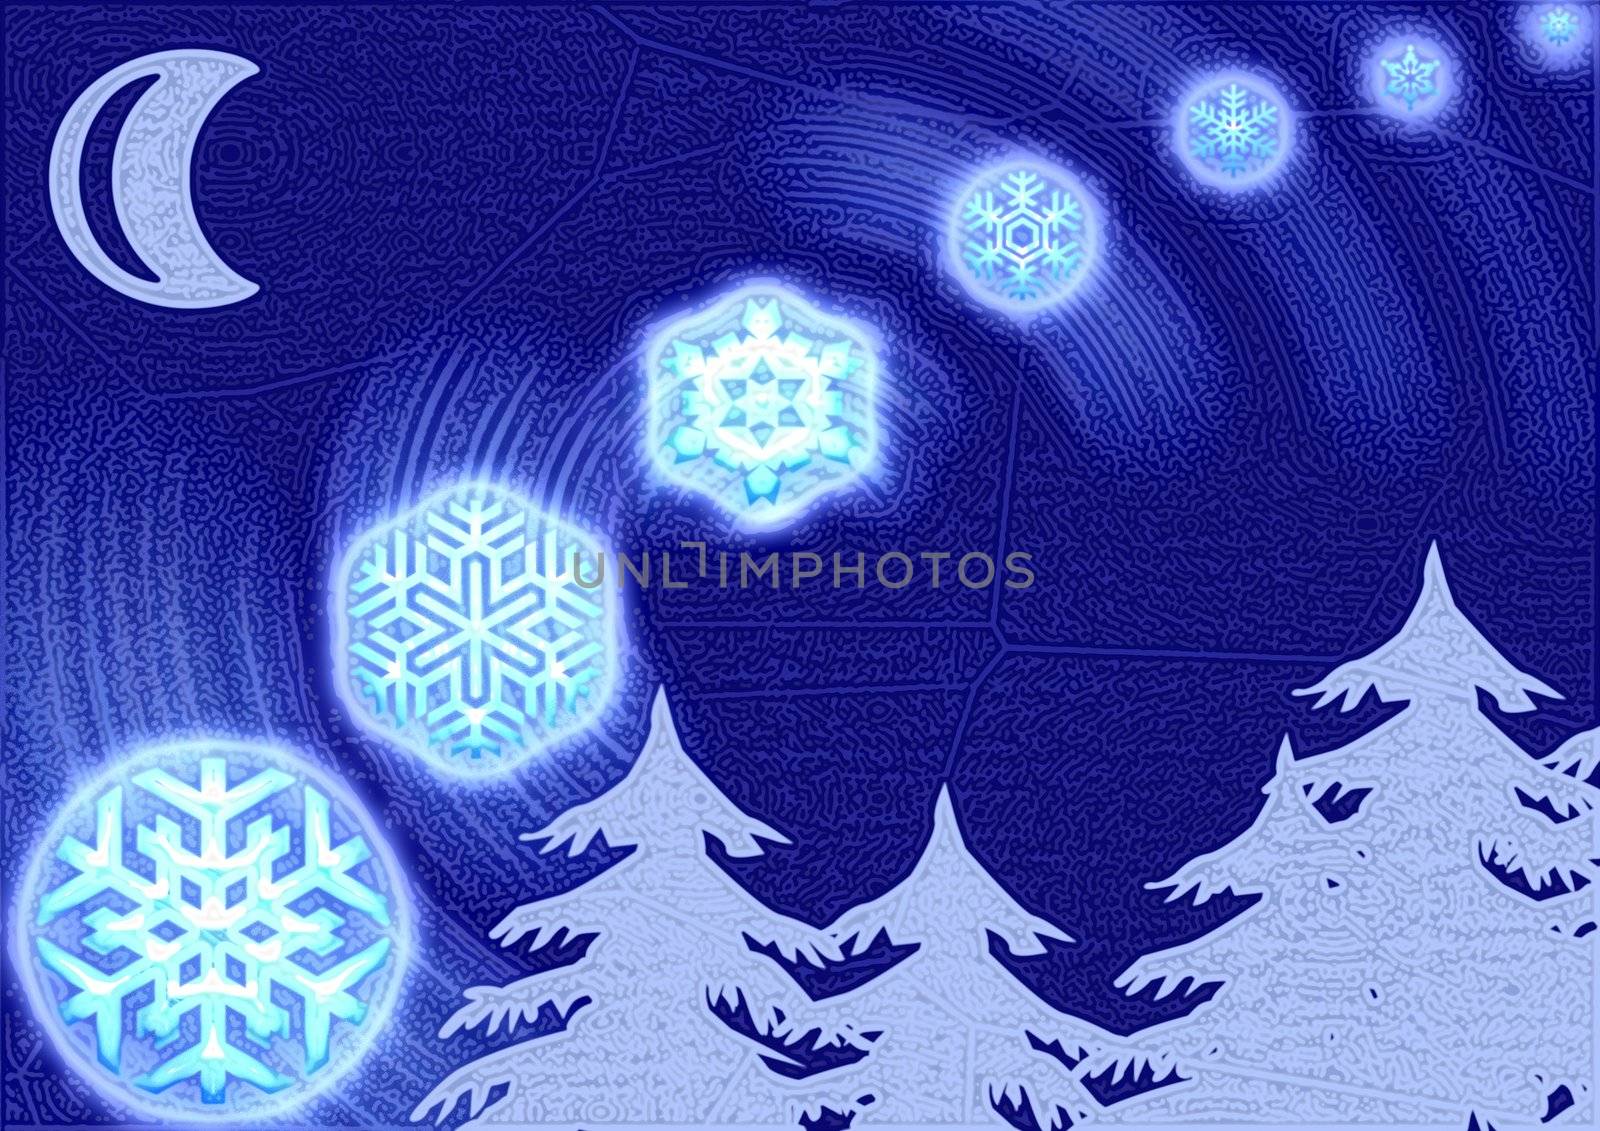 great creative abstract rich textured image moon nights in the forest and the Snowflakes.